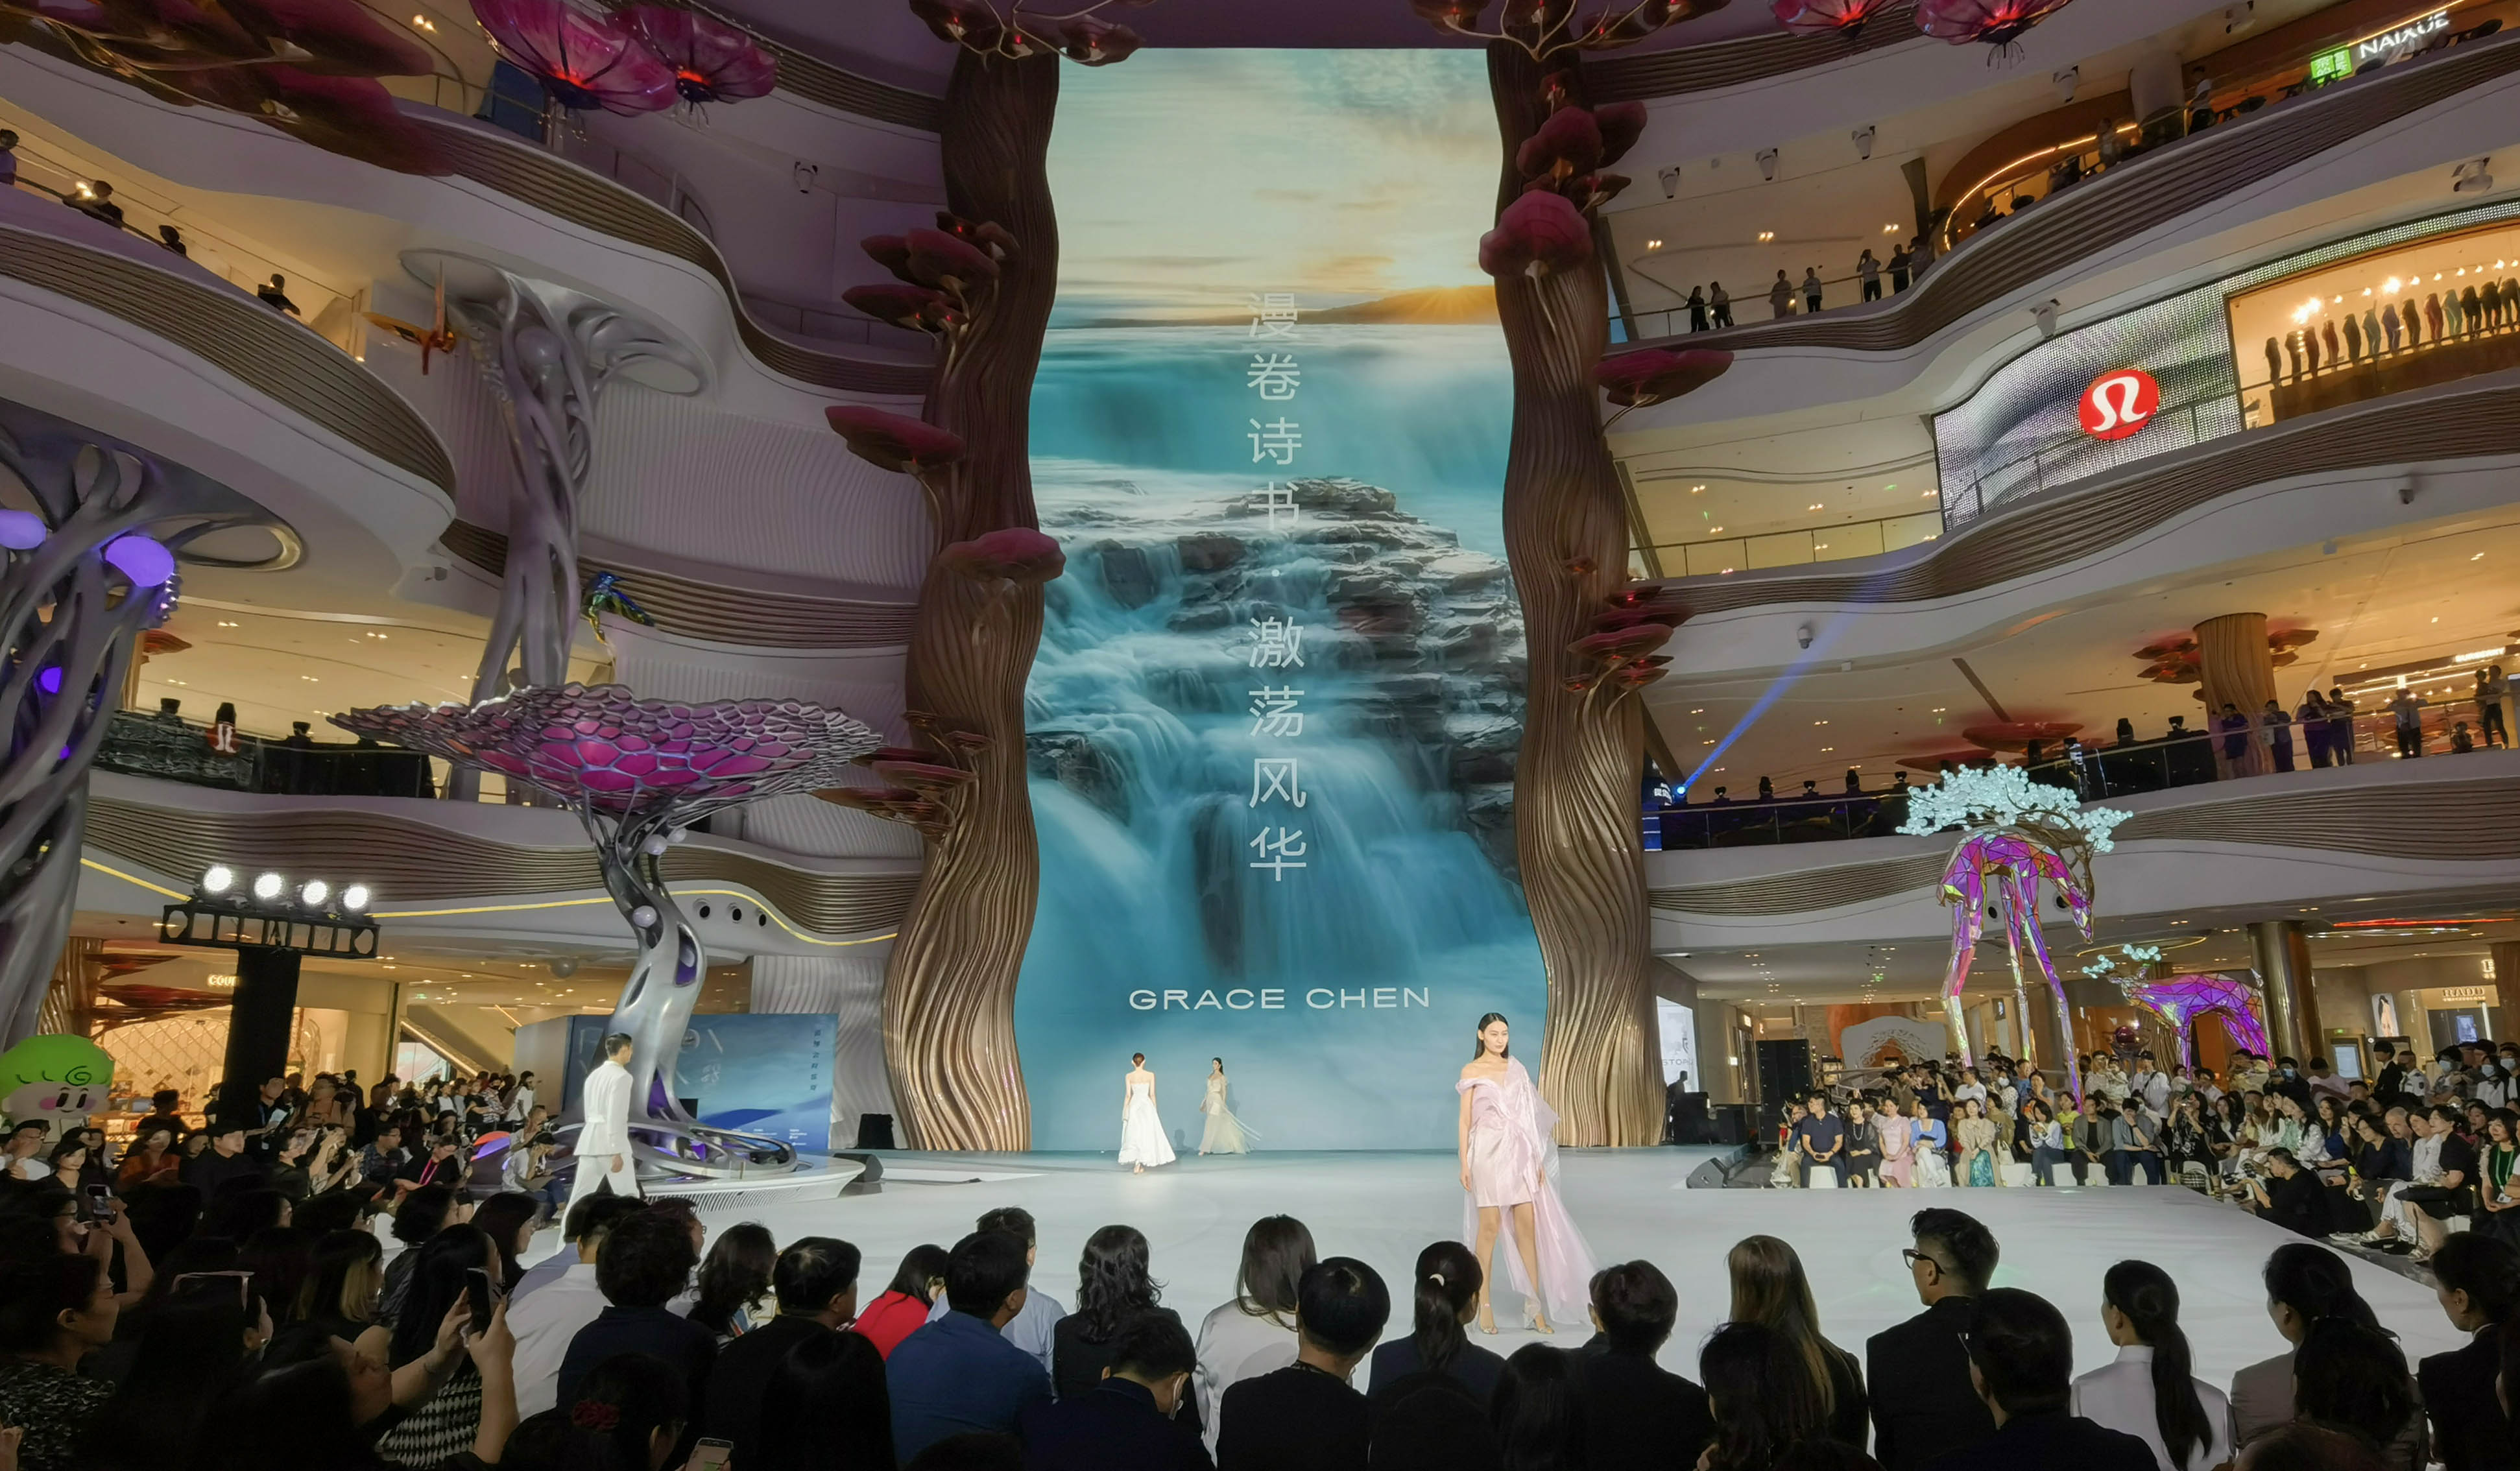 Designer brands hold fashion shows during Hainan Expo, April 10, 2023. He Wuchang/ Hainan Expo 